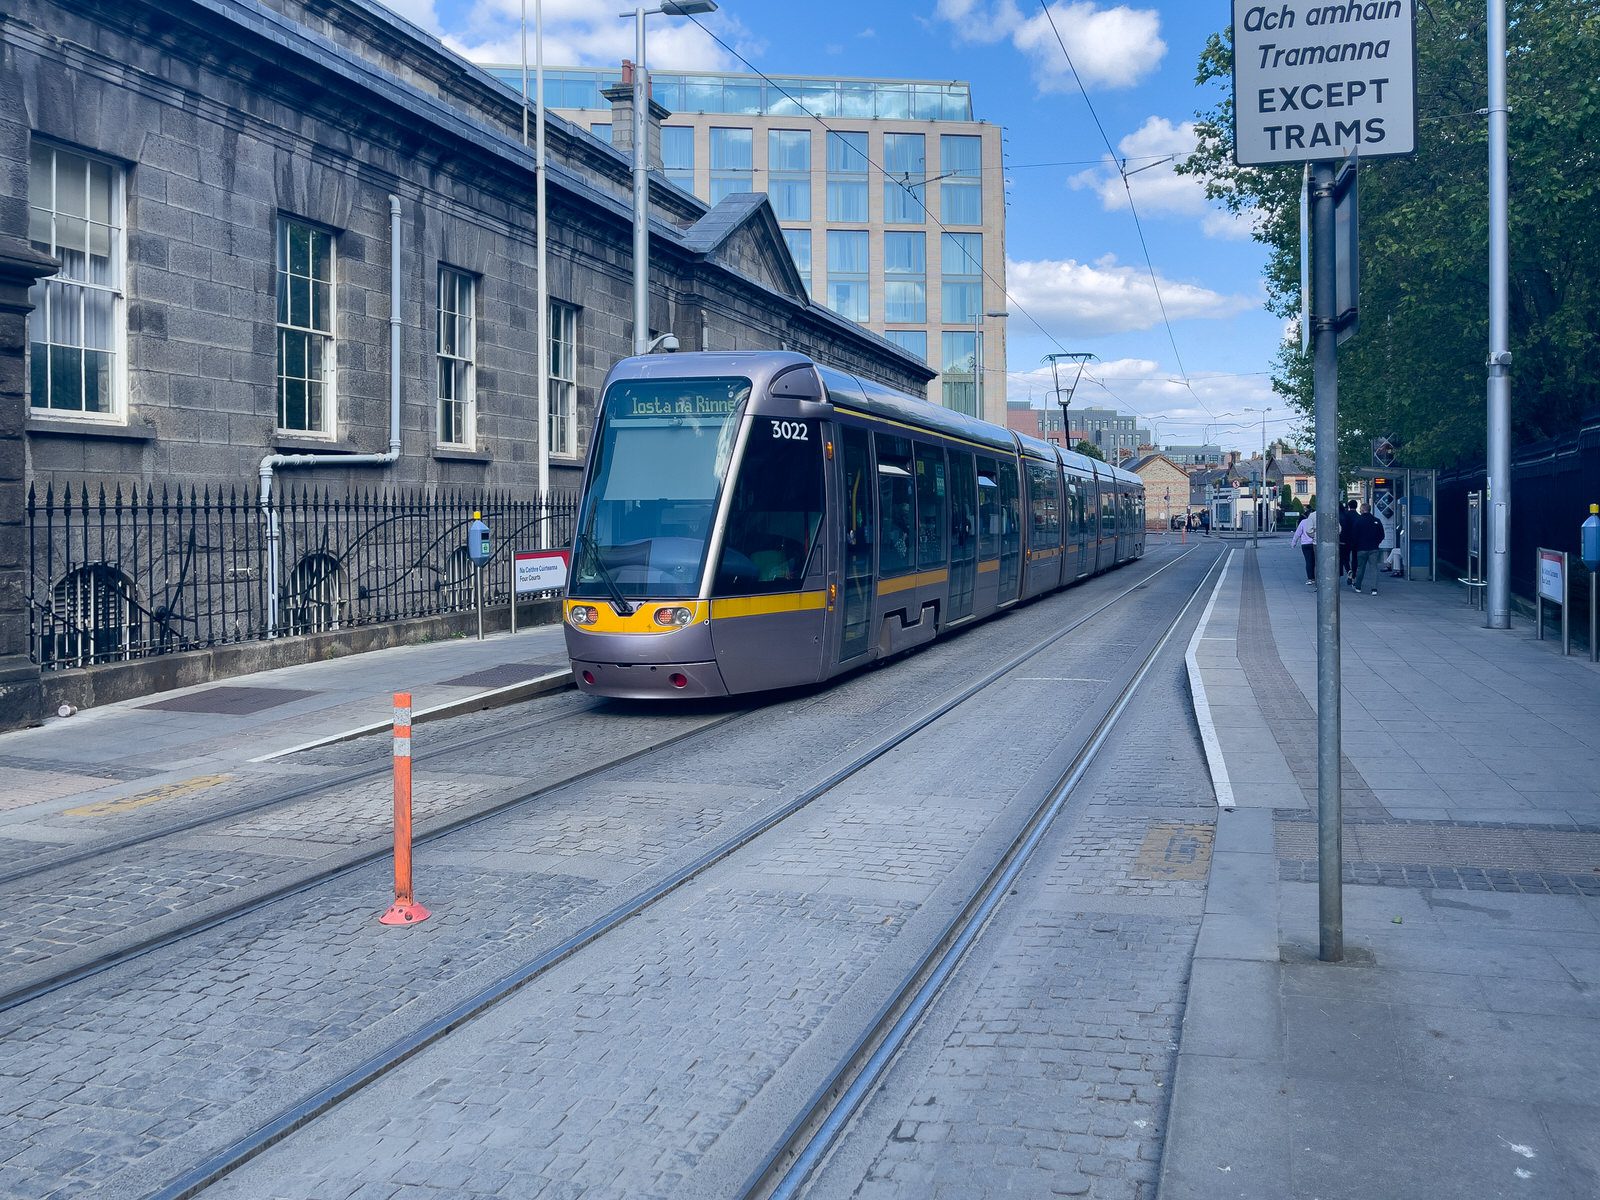 THE LUAS FOUR COURTS TRAM STOP [THERE IS MUCH TO BE SEEN HERE]-234118-1